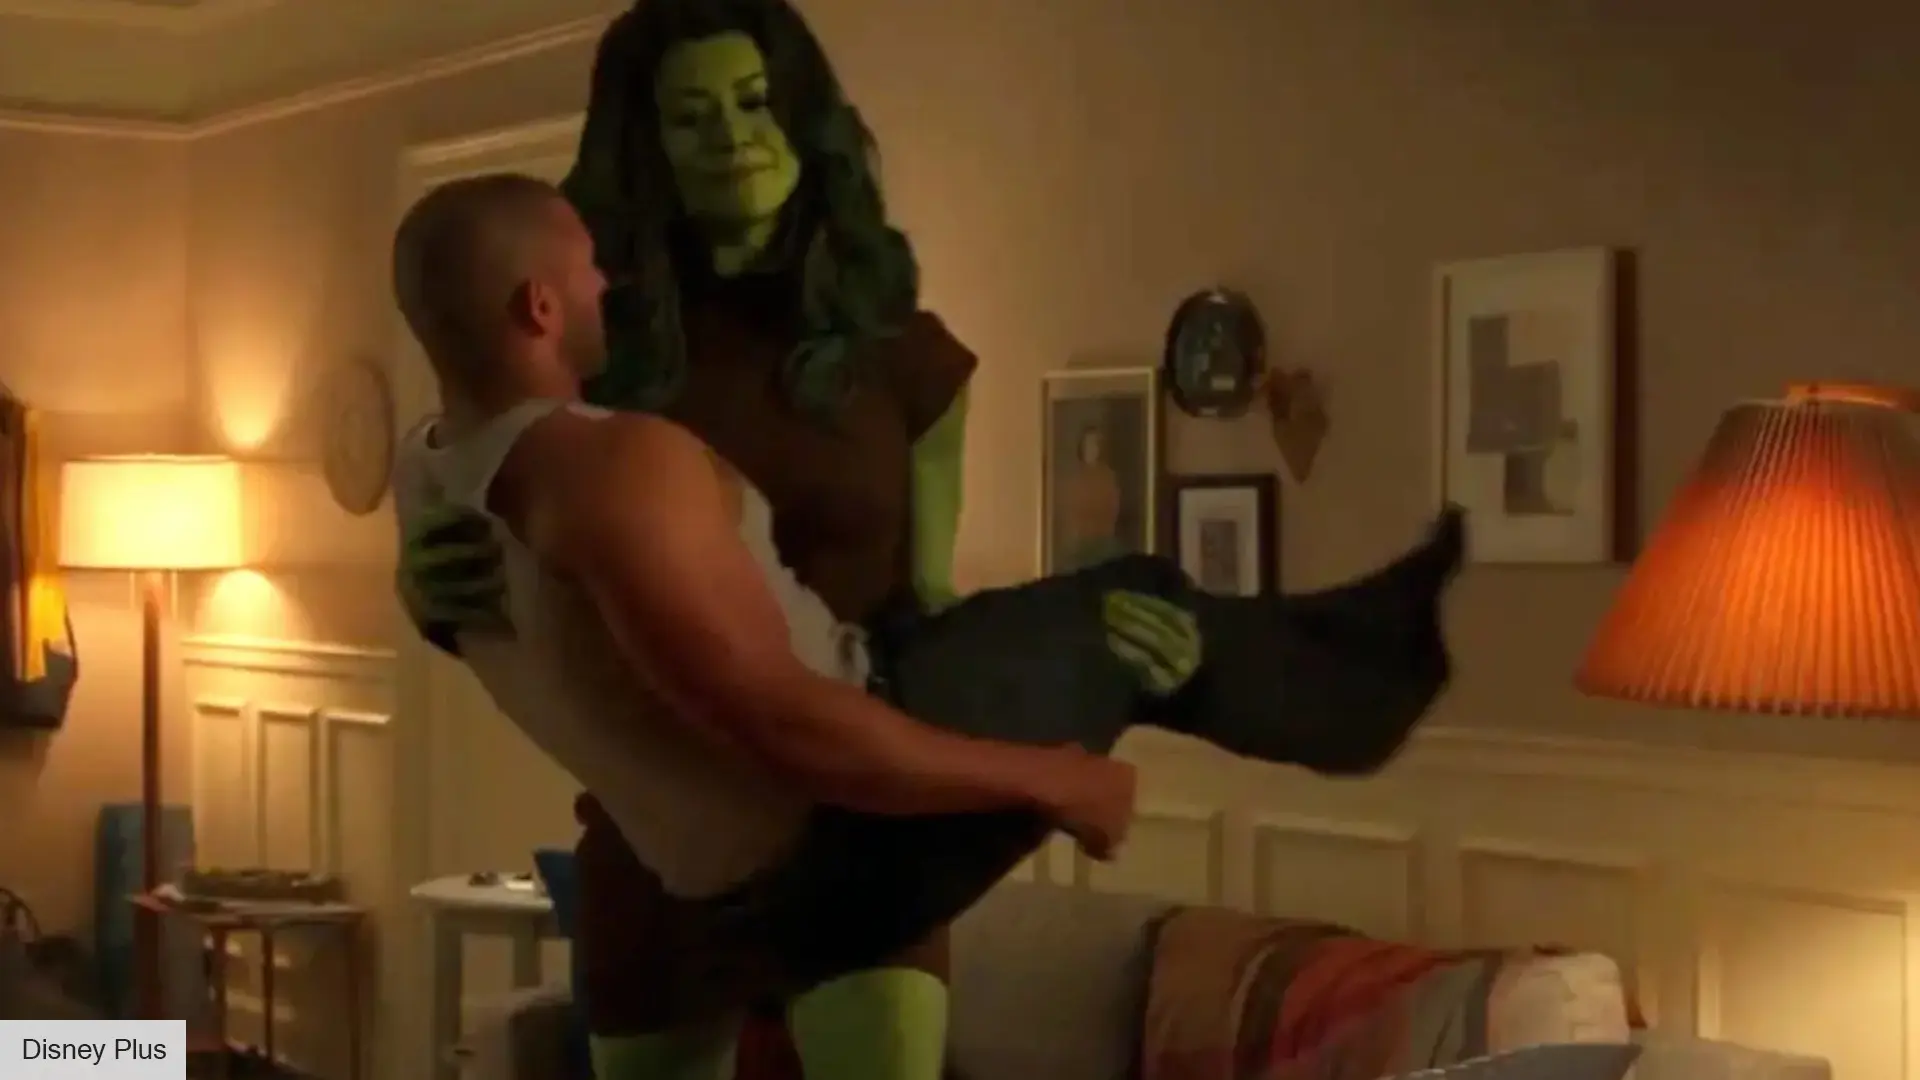 She-Hulk premieres on Disney Plus: stars, episodes and more